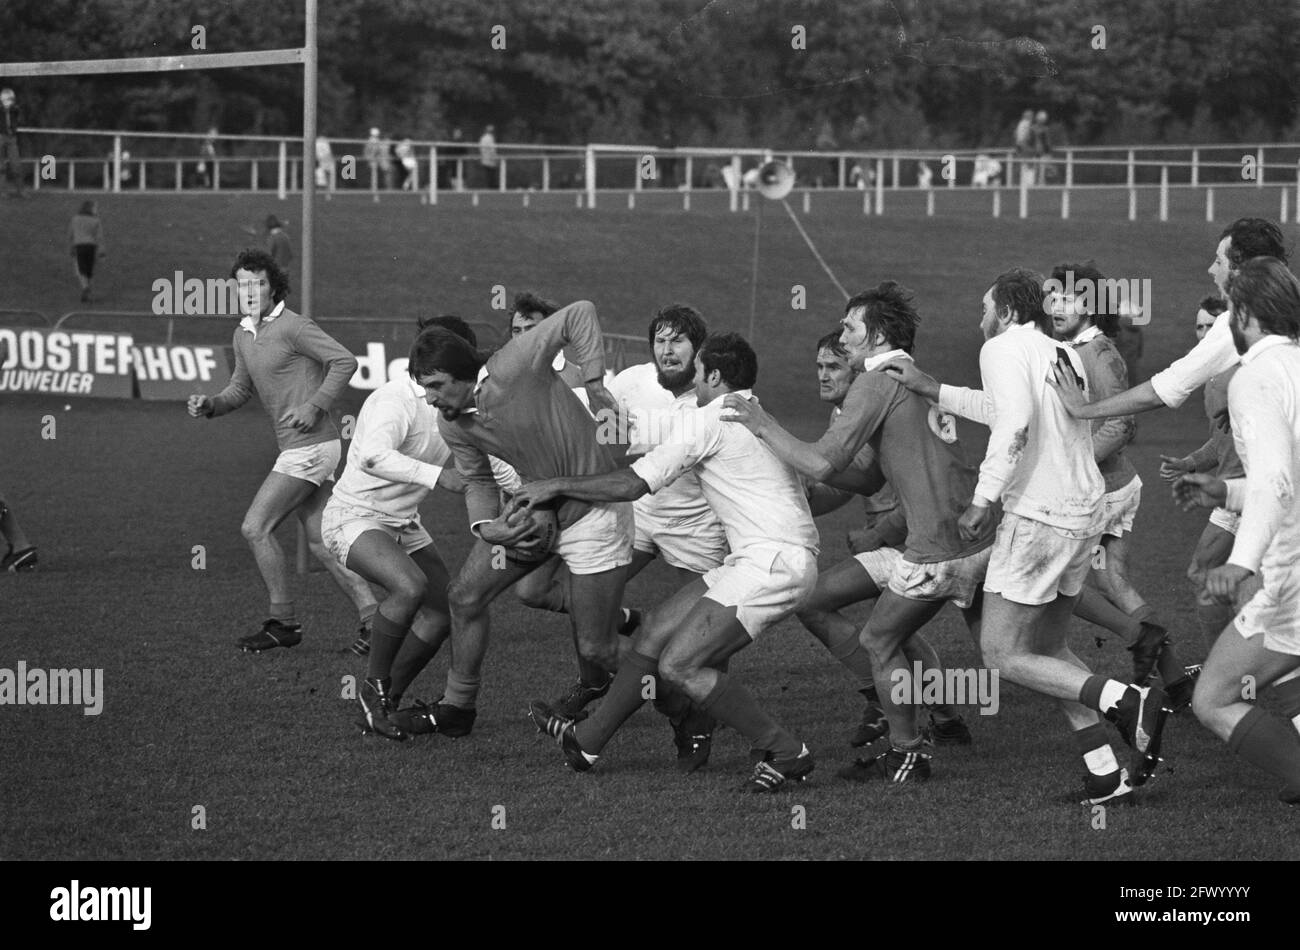 Rugby international Netherlands v West Germany, large clump of players during Dutch attack, October 19, 1974, rugby, The Netherlands, 20th century press agency photo, news to remember, documentary, historic photography 1945-1990, visual stories, human history of the Twentieth Century, capturing moments in time Stock Photo